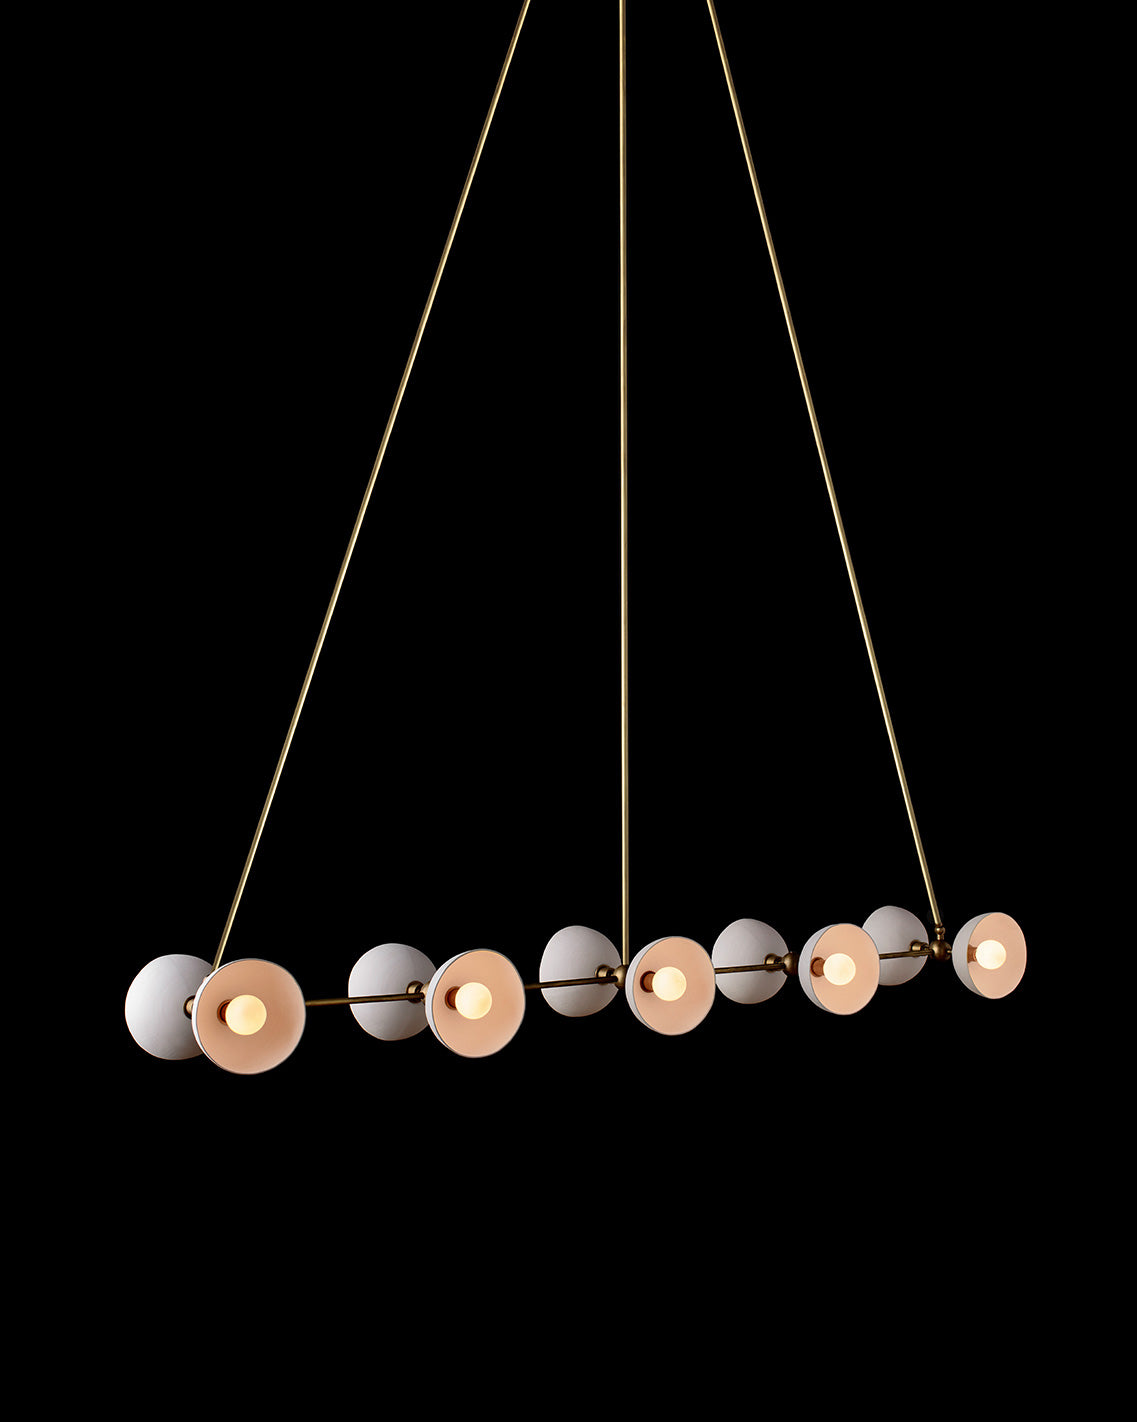 TRAPEZE : 10 ceiling pendant in Aged Brass finish with Porcelain bowls, hanging against a black background. 